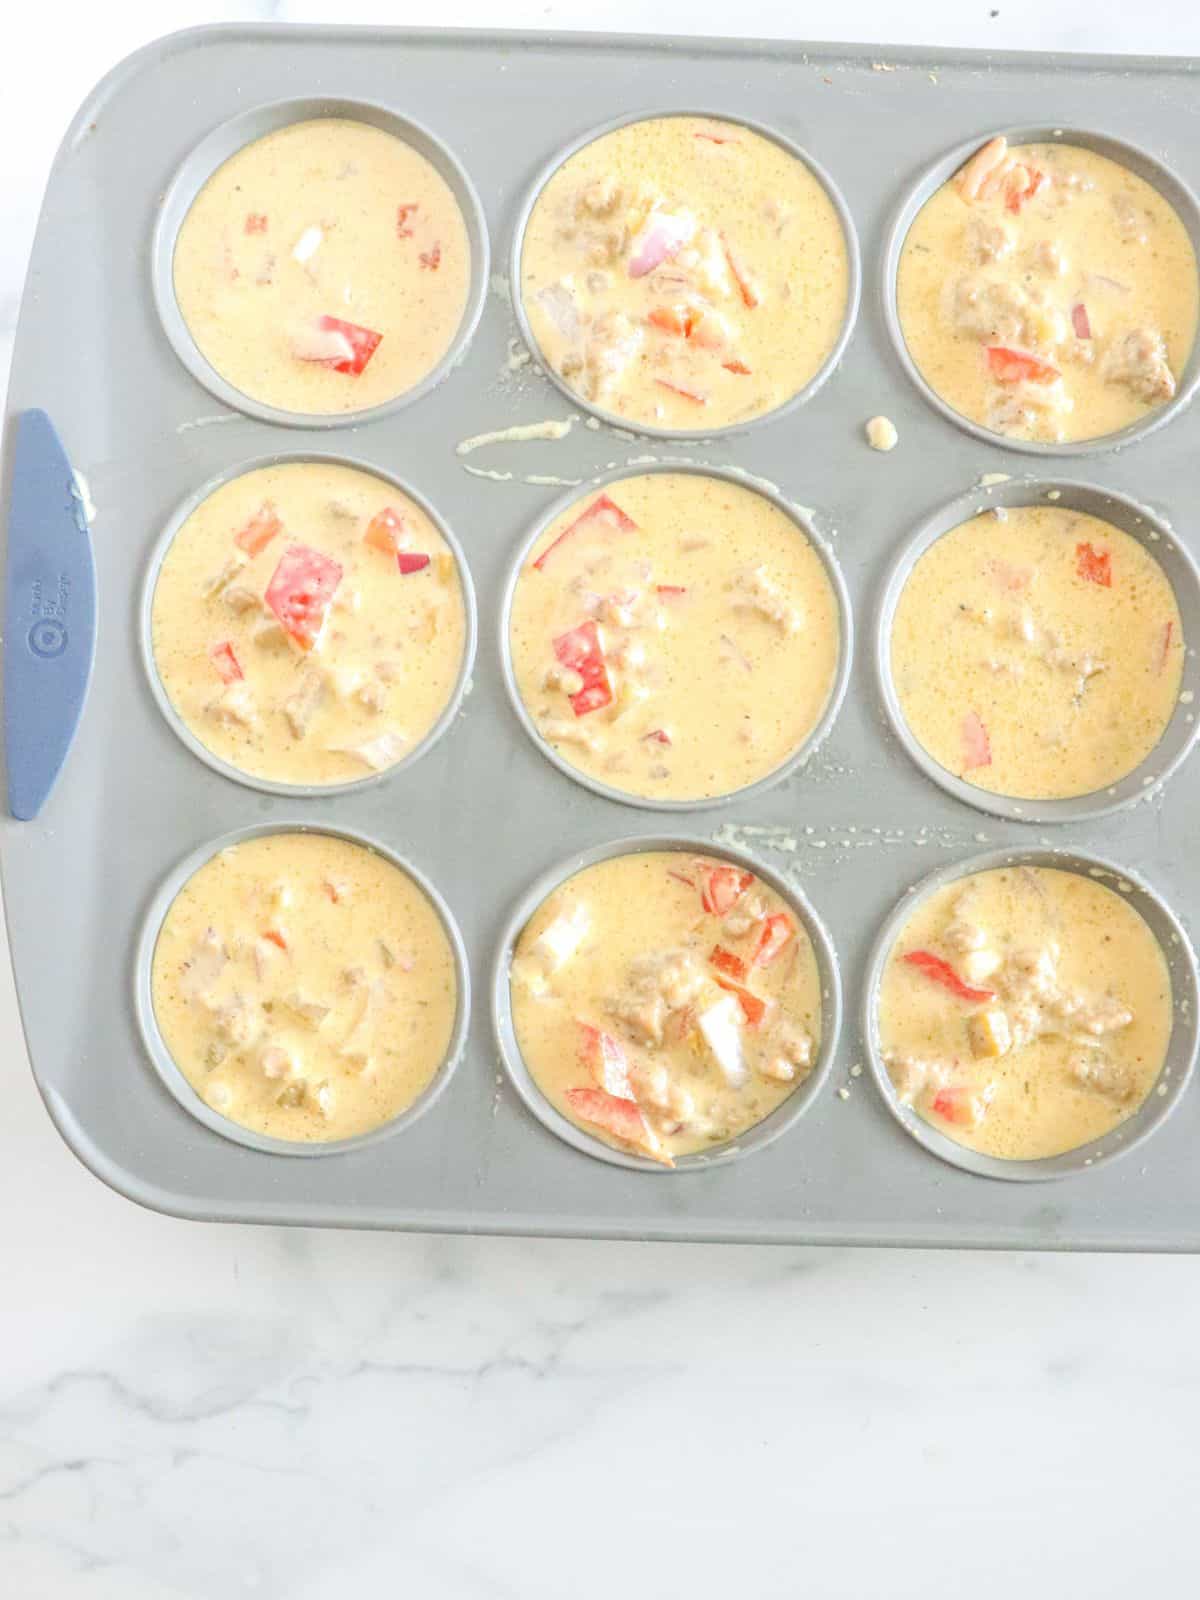 filled cupcake liners with batter